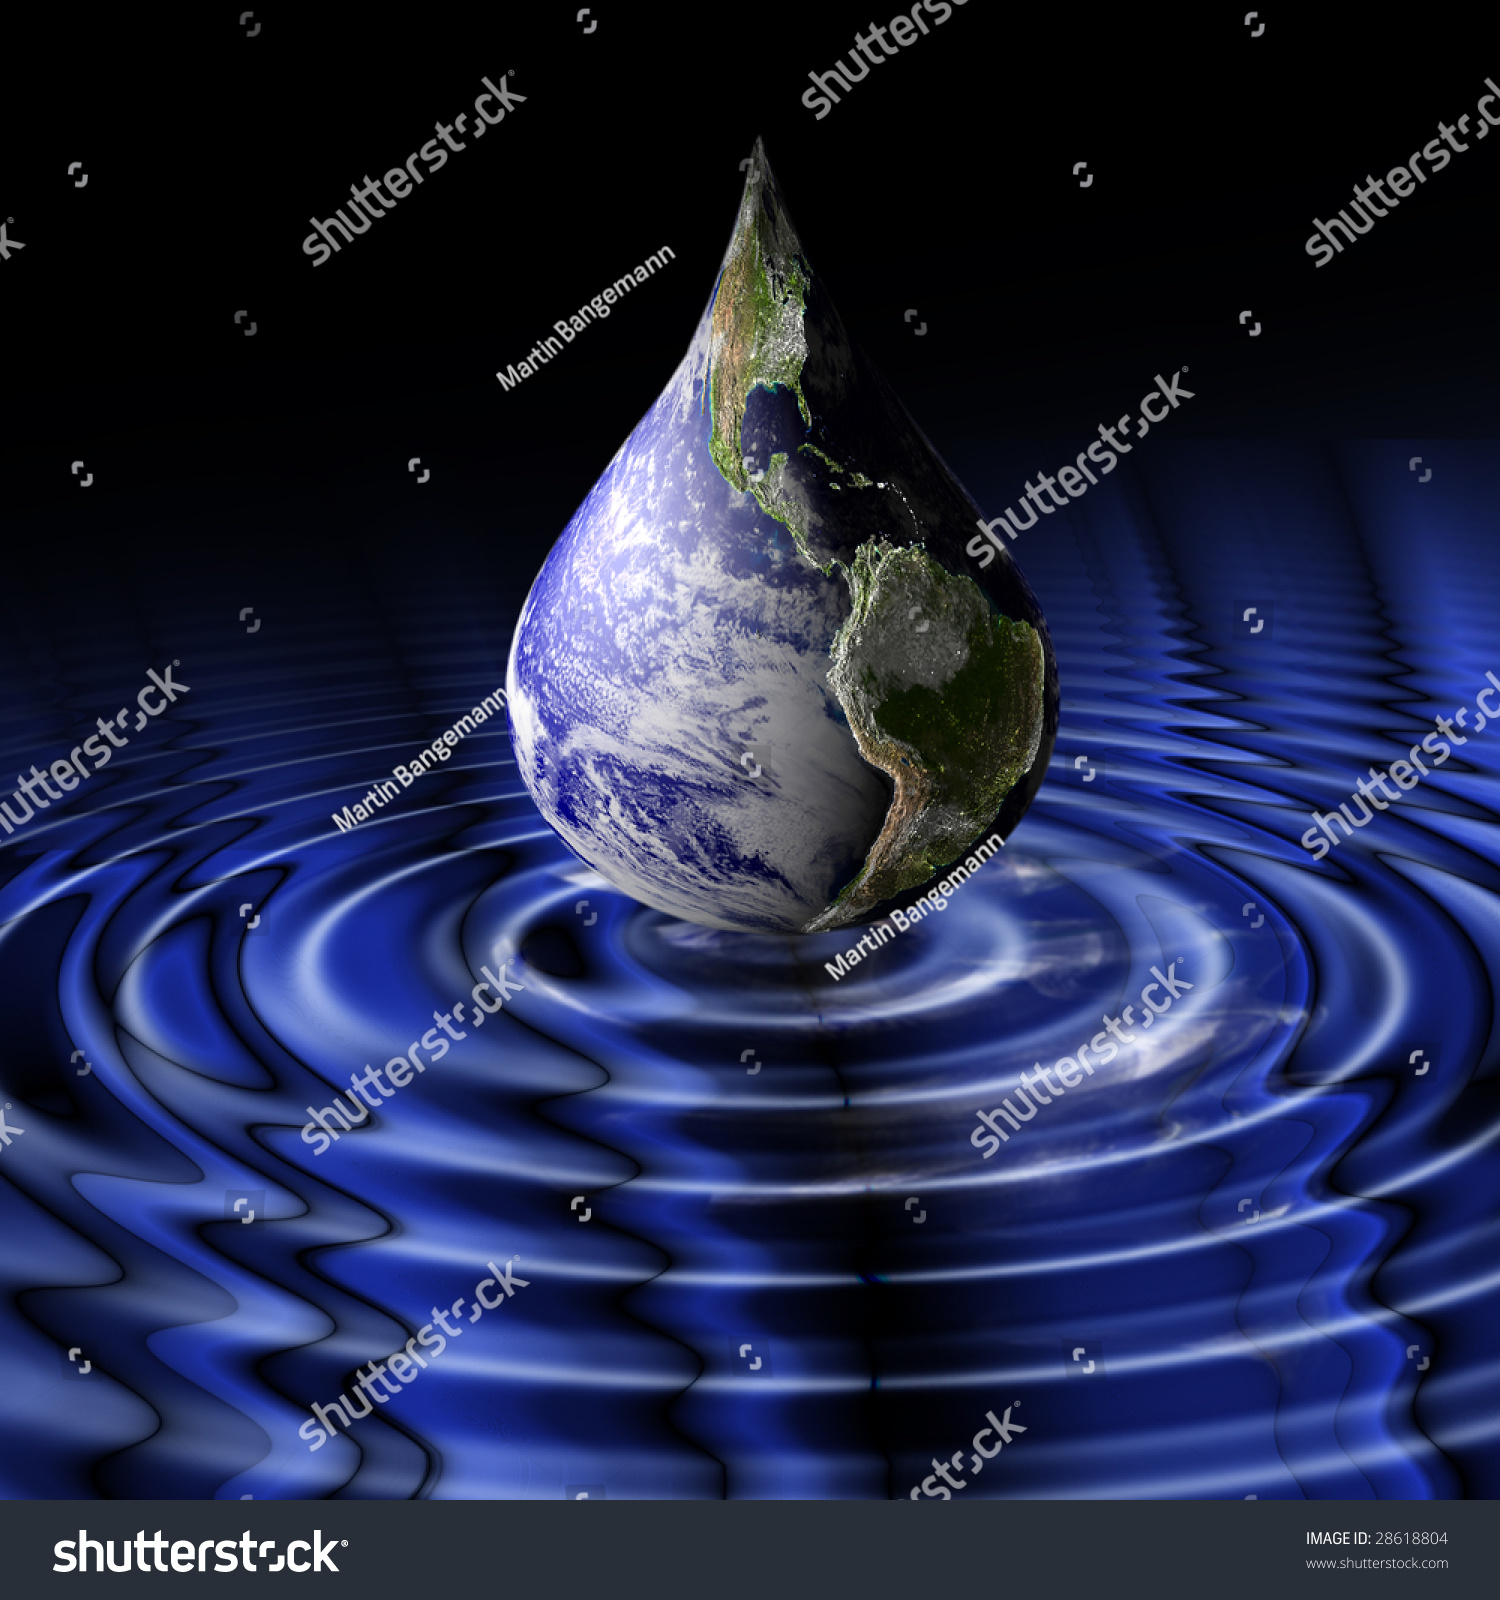 Planet Earth As A Drop Shortly Before Impact. Dark Composition With ...